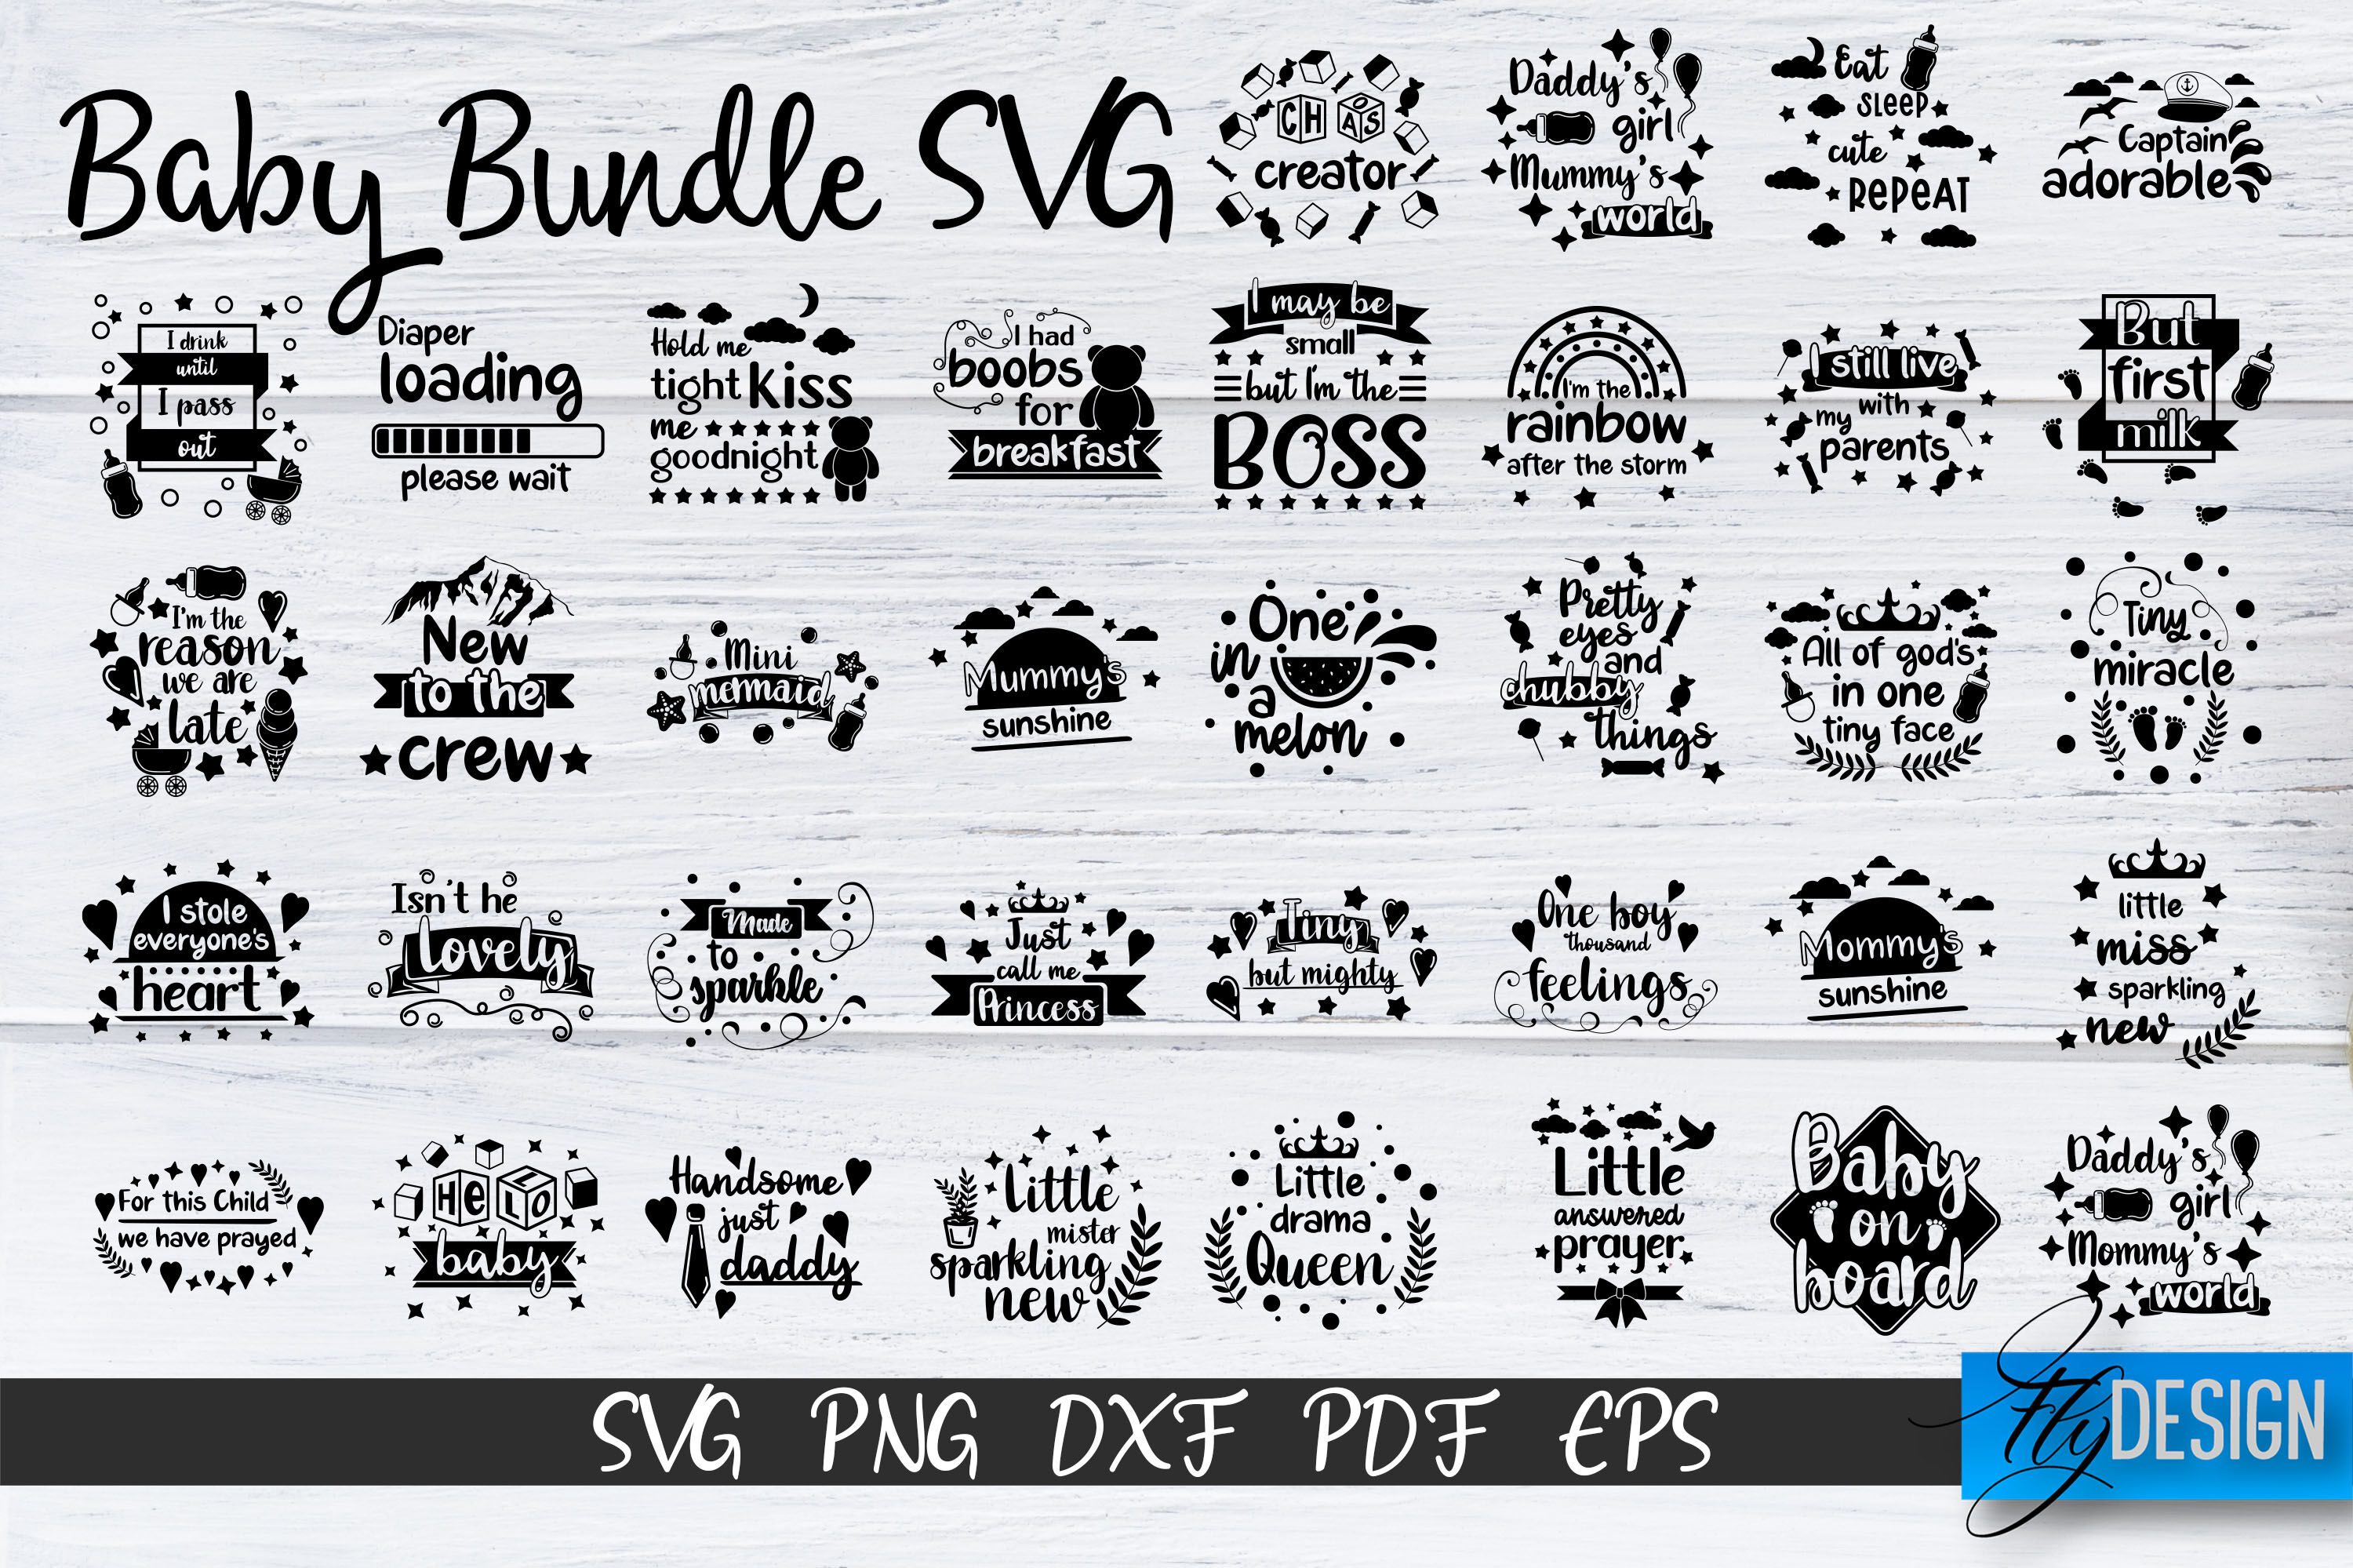 Baby Bundle SVG. Baby Shower SVG. Funny Quotes and Sayings. By Fly Design |  TheHungryJPEG